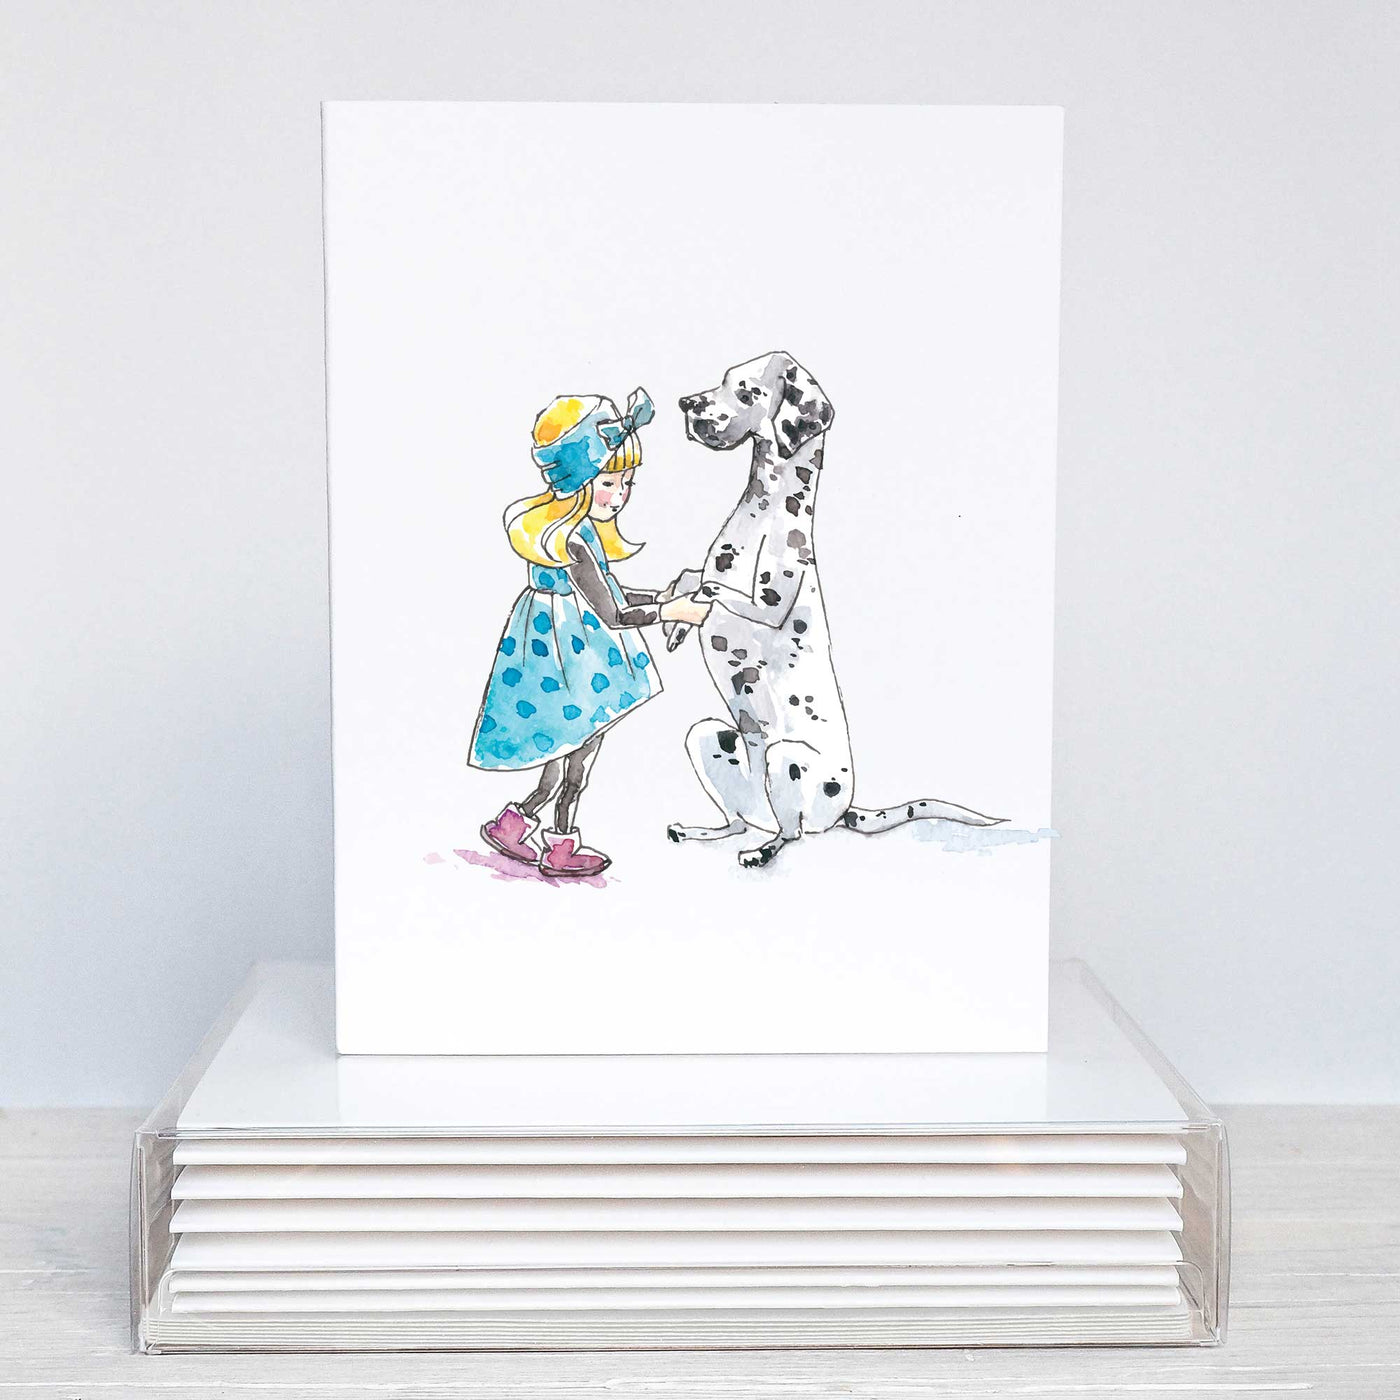 Blank Note Card Set - Girl and Her Dalmation | Pawlicious & Company